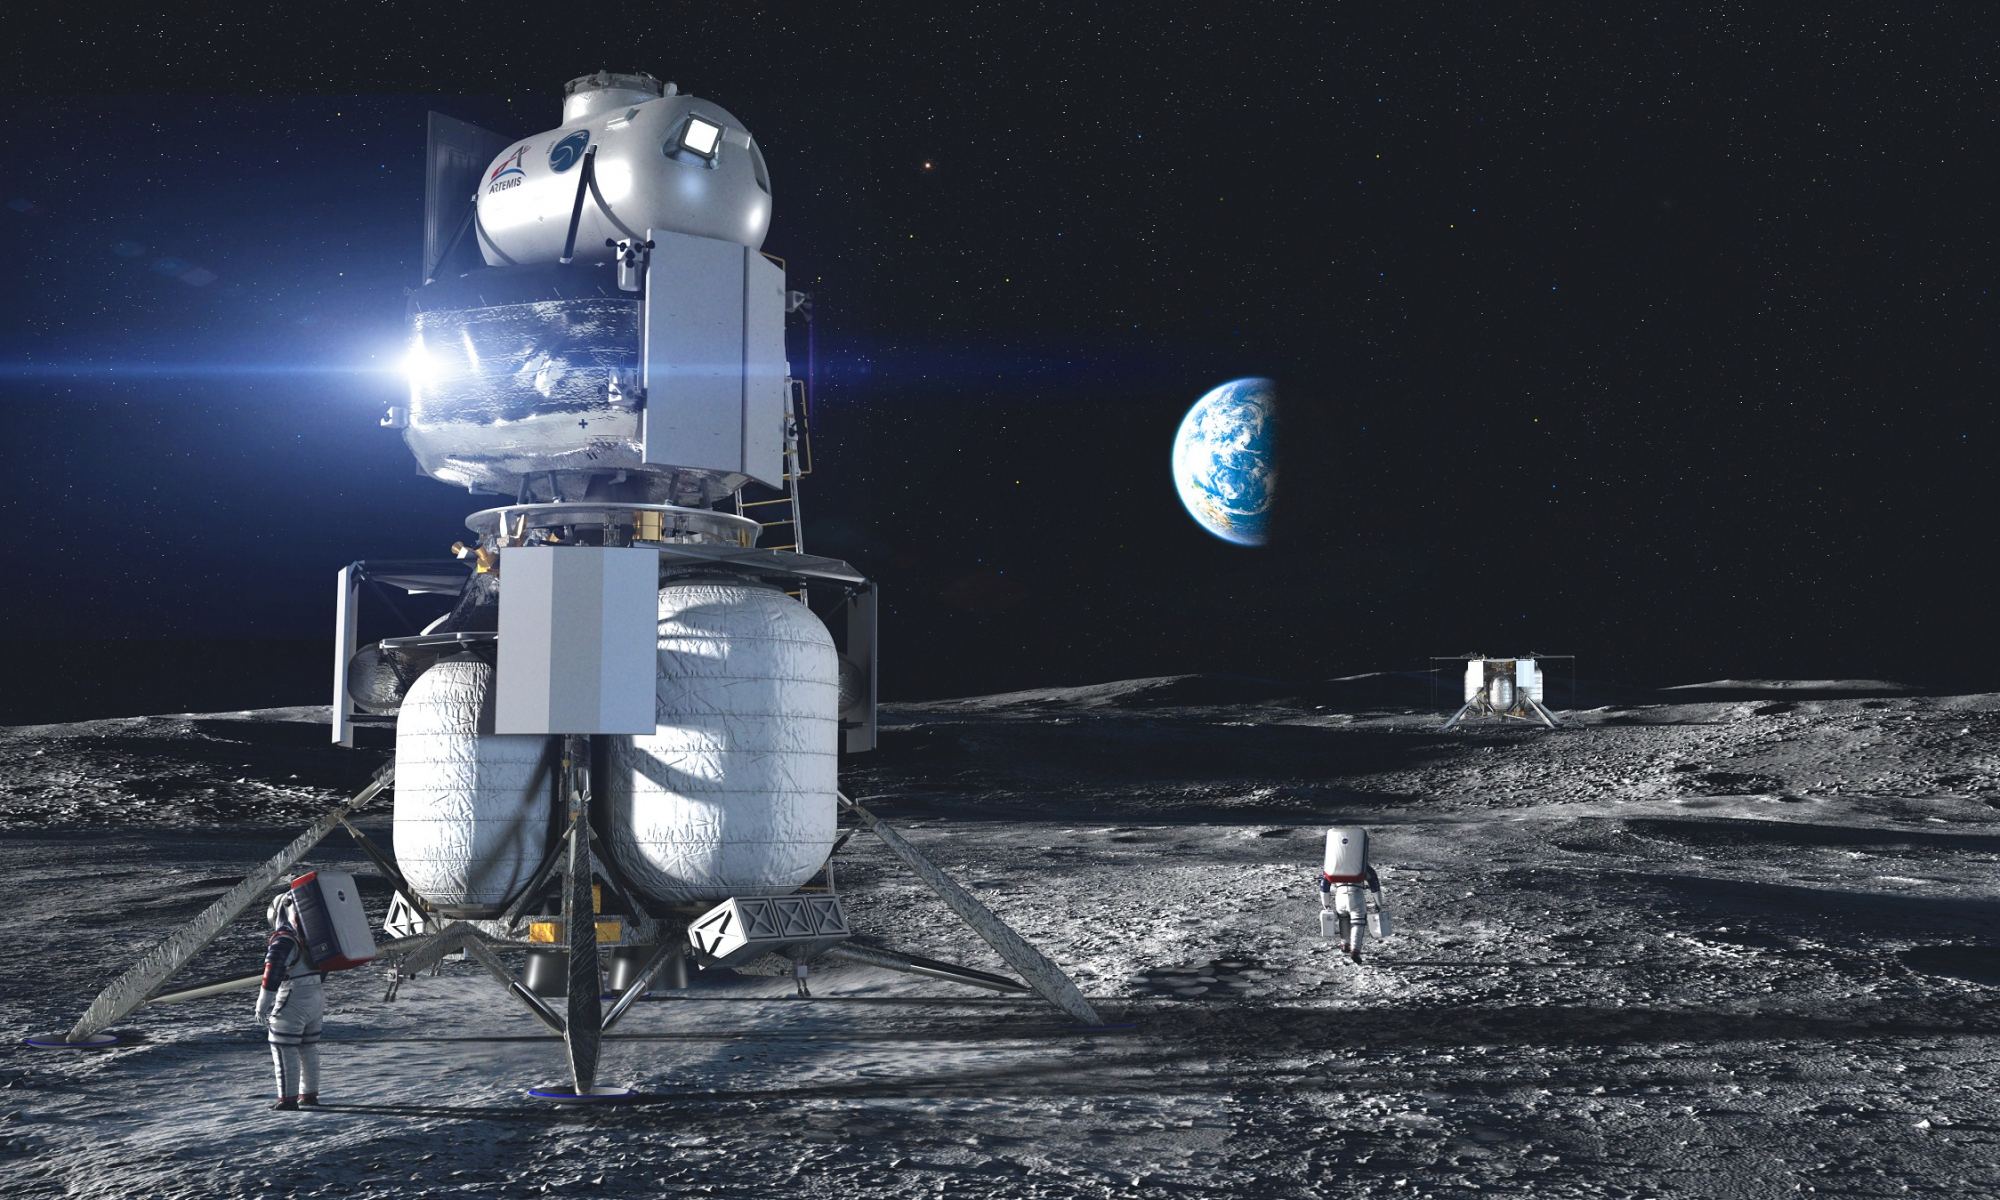 Early conceptual renderings of cargo variants of human lunar landing systems from Blue Origin.